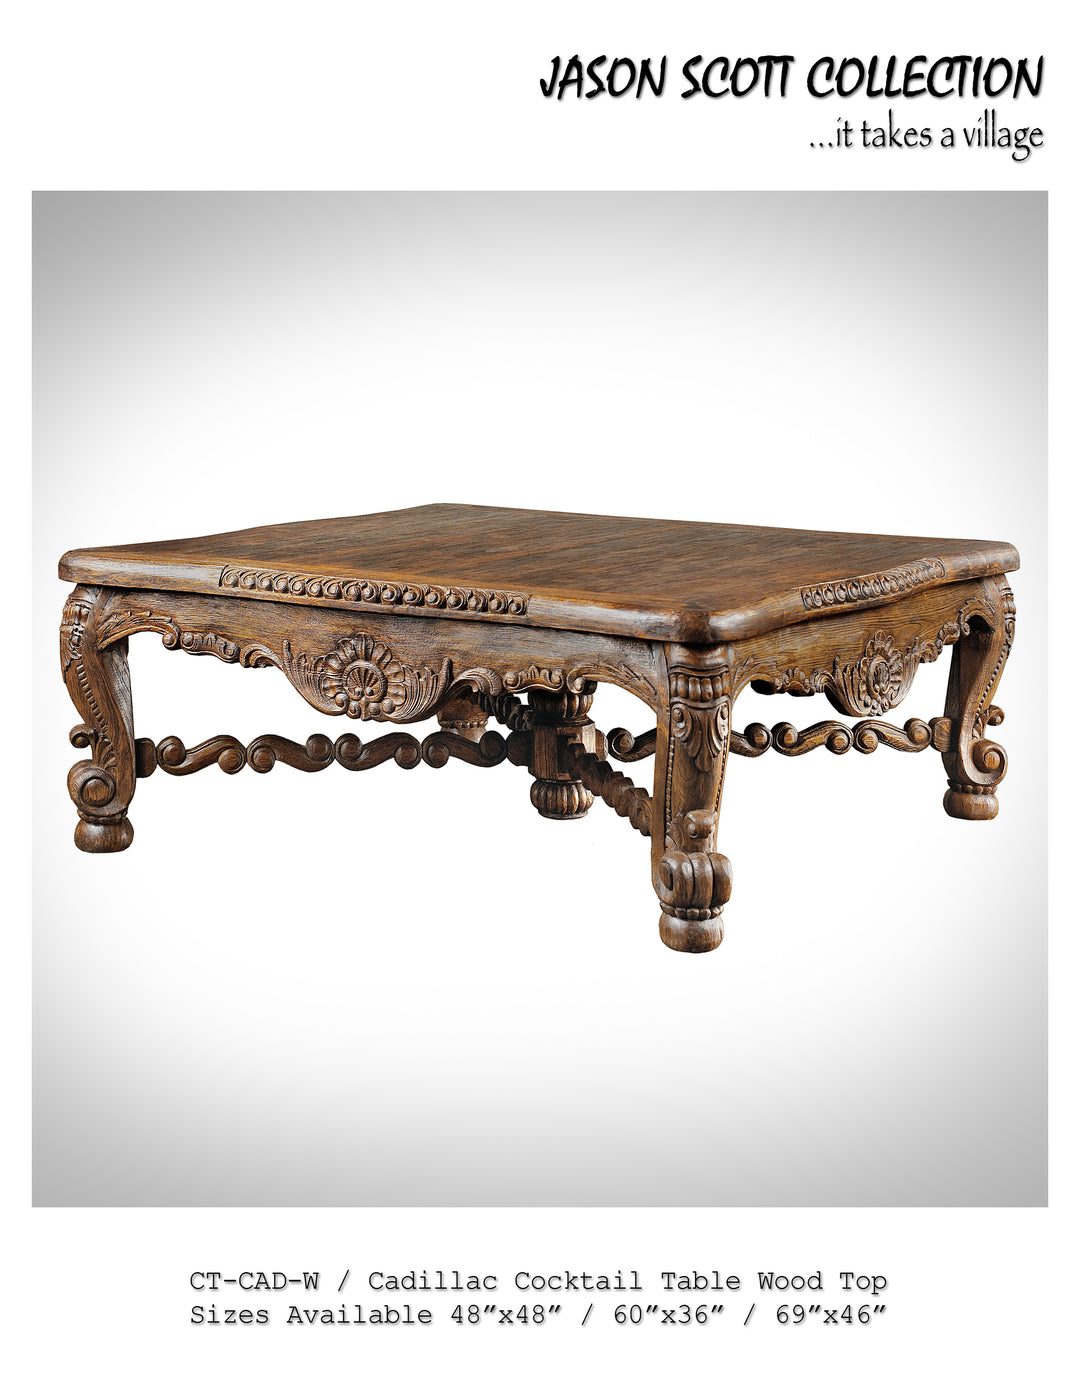 Jason Scott Collection (Coffee Tables)